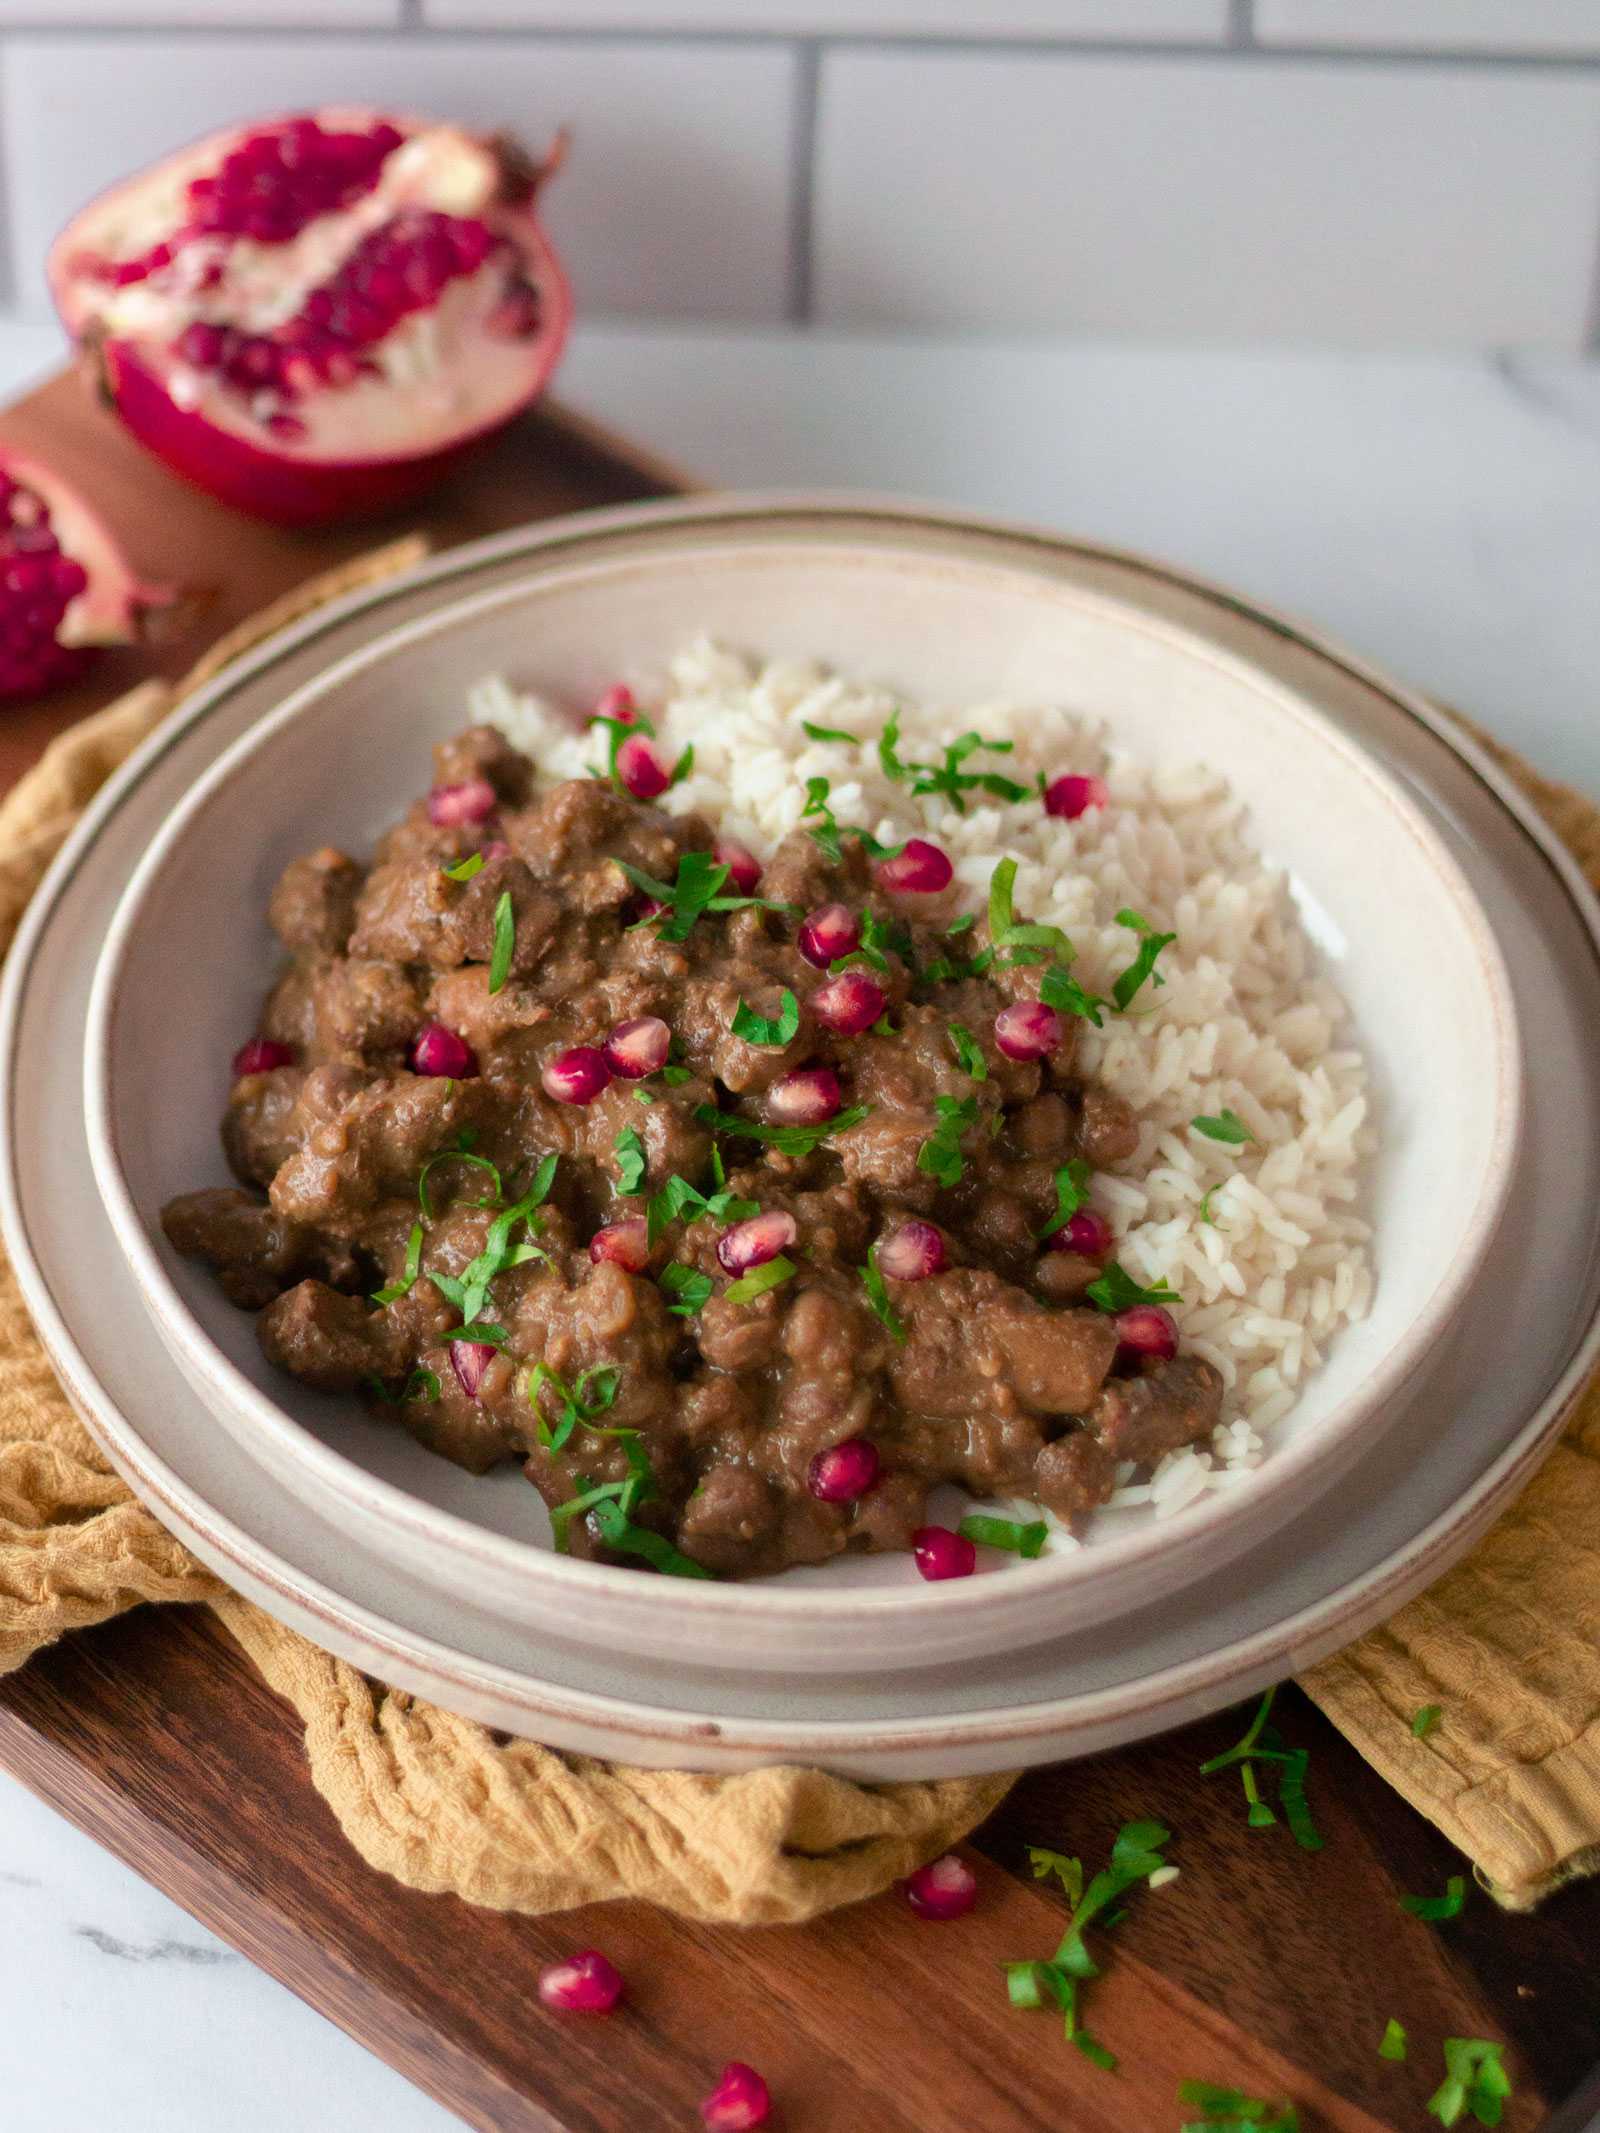 Fesnjan is a Persian dish, which in the provided image, is displayed in a white bowl topped with fresh pomegranate seeds. This sweet and sour stew has chicken thighs cooked in a spiced walnut and pomegranate molasses. Its rich tangy flavour will surely awaken your taste buds. 